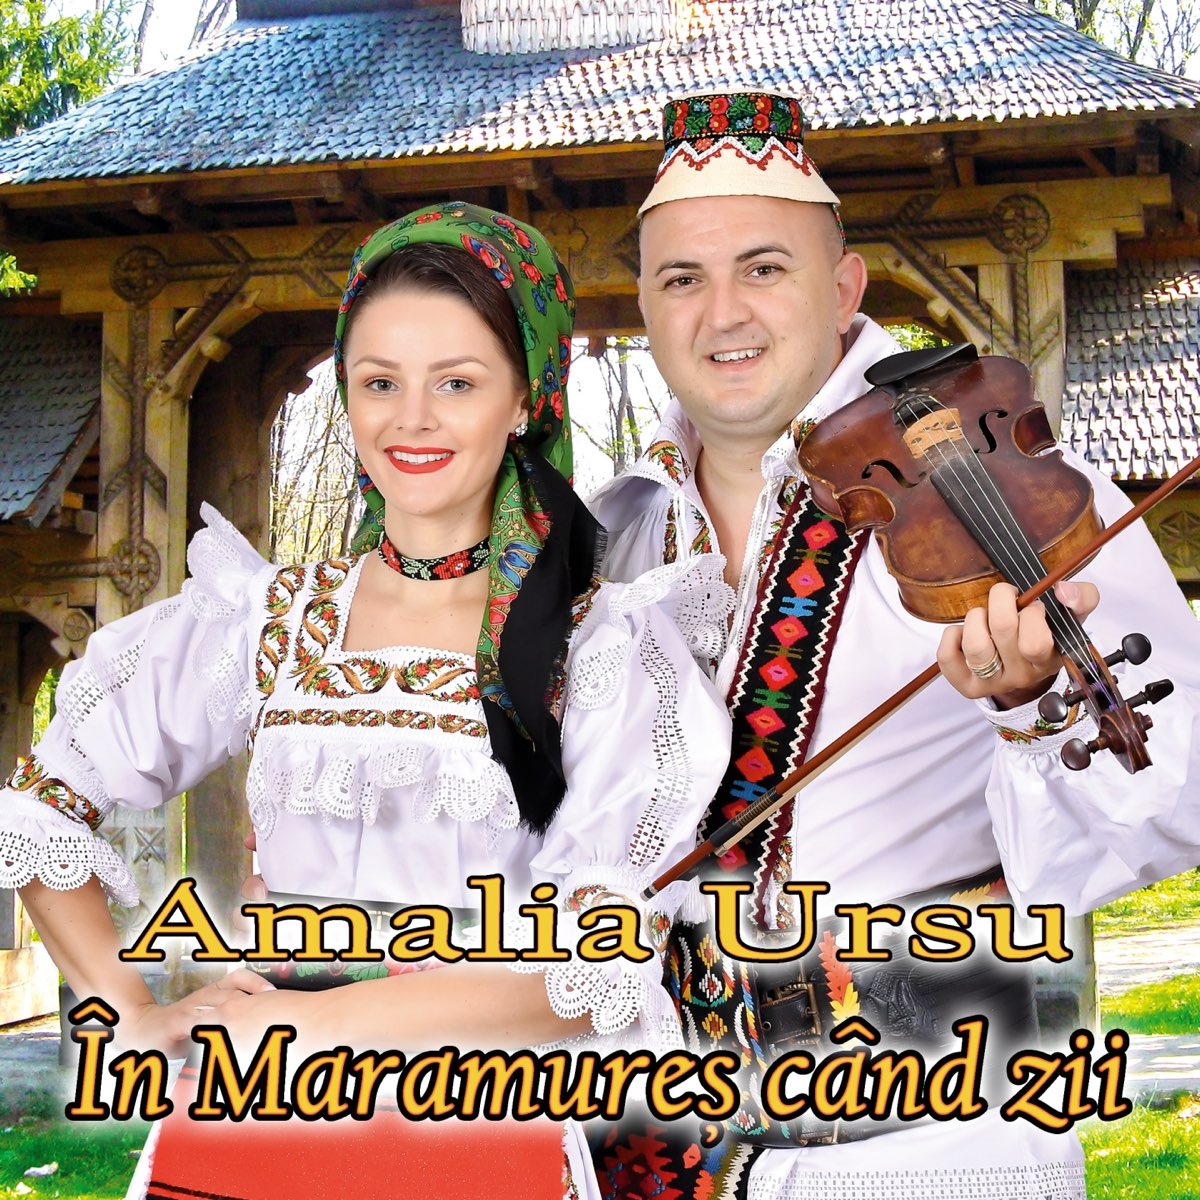 In Maramures Cand Zii by Amalia Ursu on Apple Music